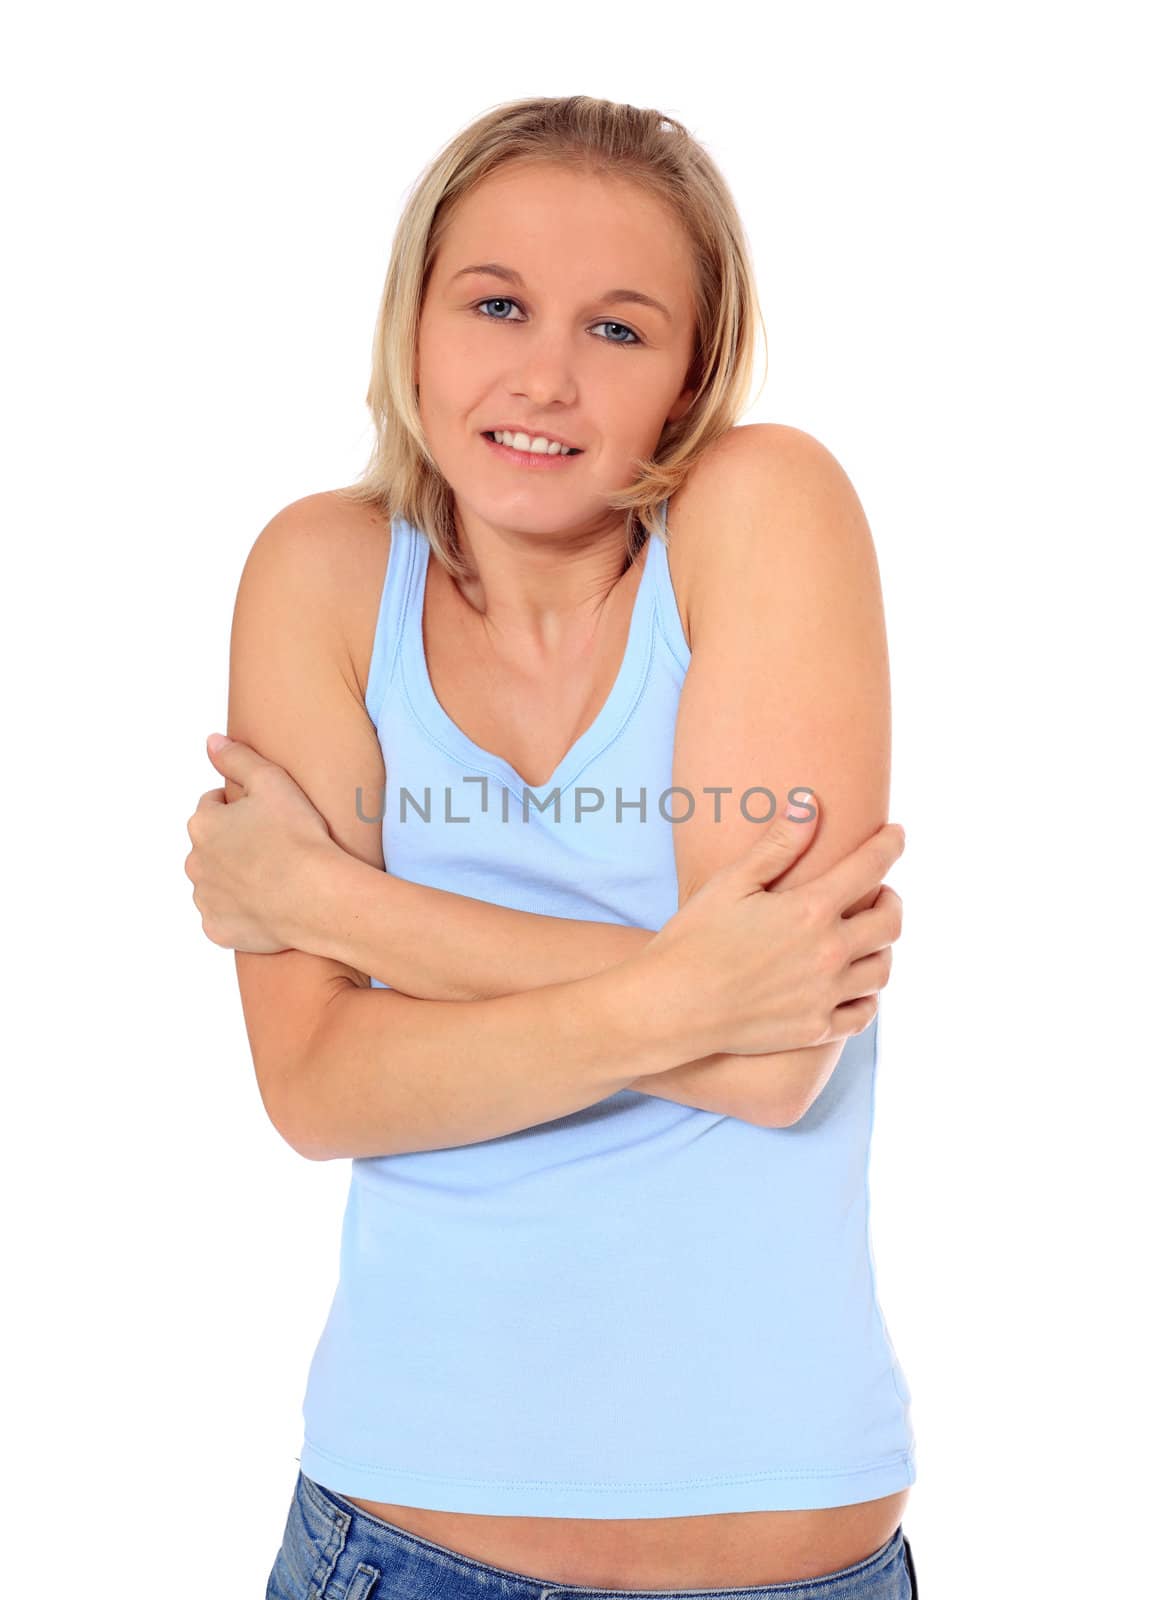 Attractive young scandinavian woman freezing. All on white background.